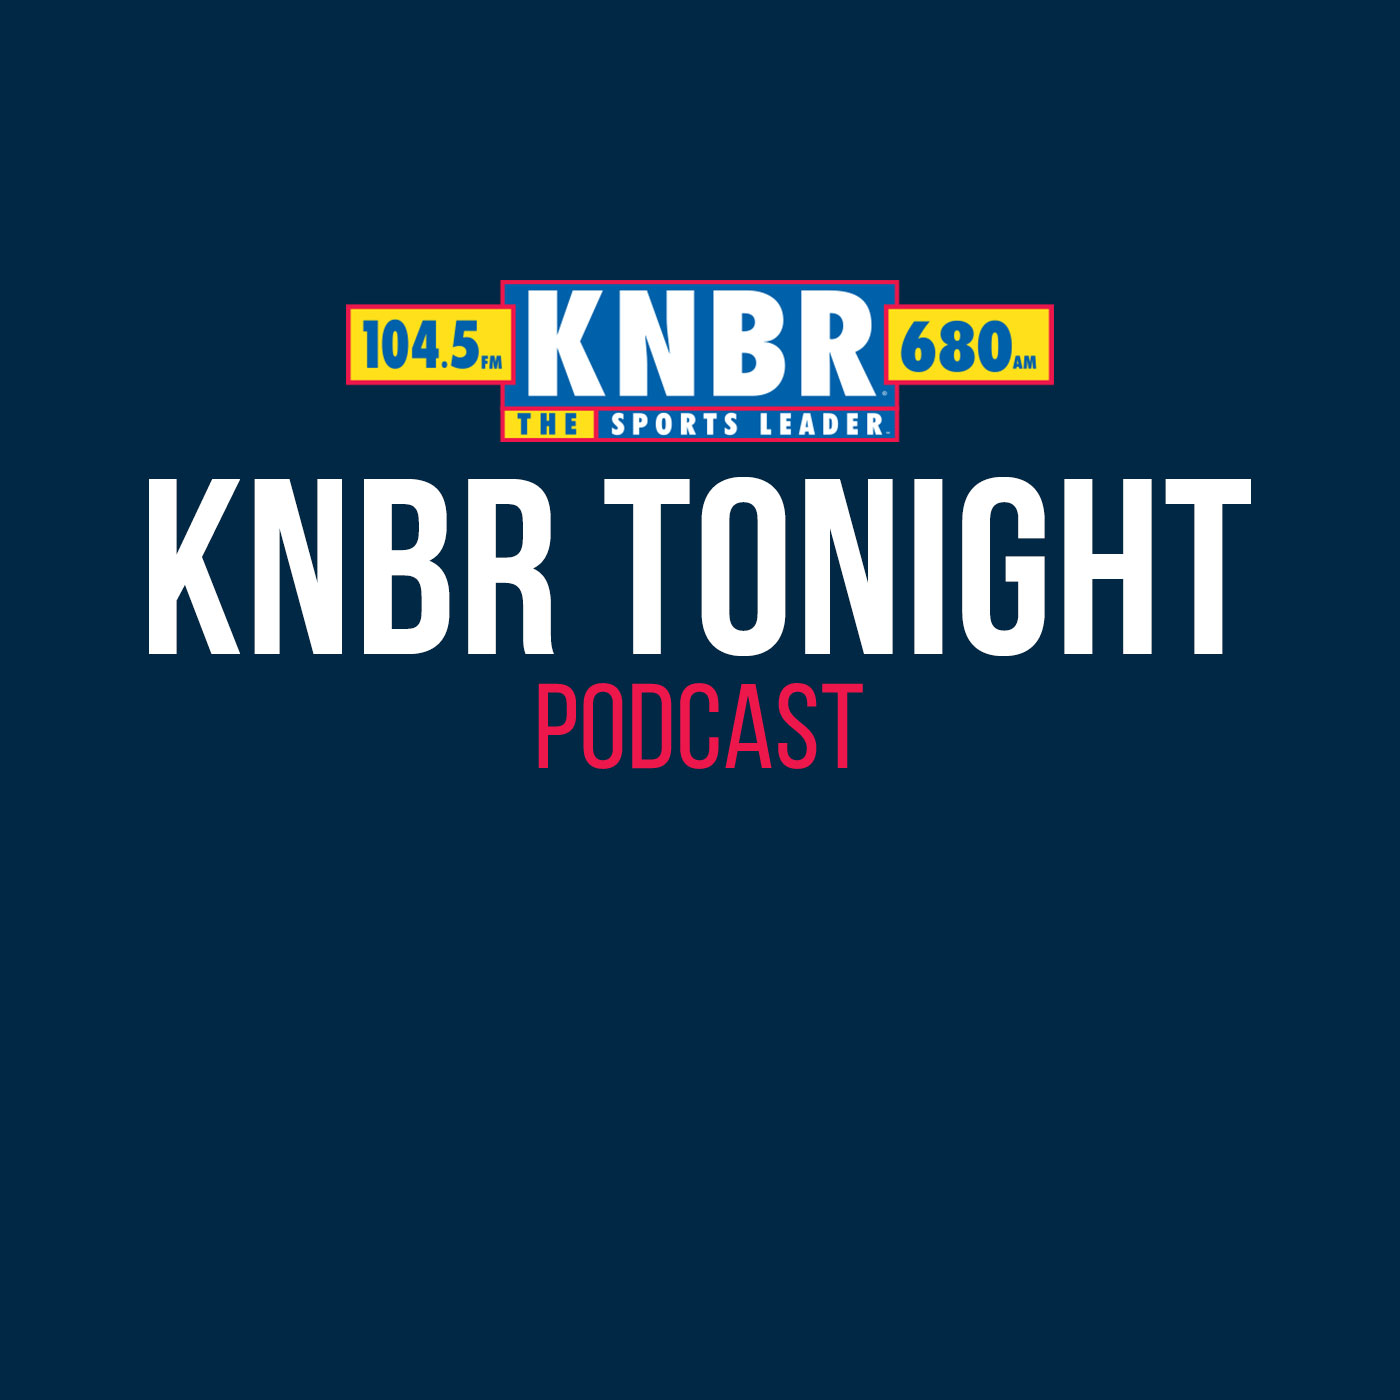 12-1 Kendra Andrews joins KNBR Tonight with Kerry Crowley to breakdown who needs to step up on the offensive side vs the Suns rematch on Friday